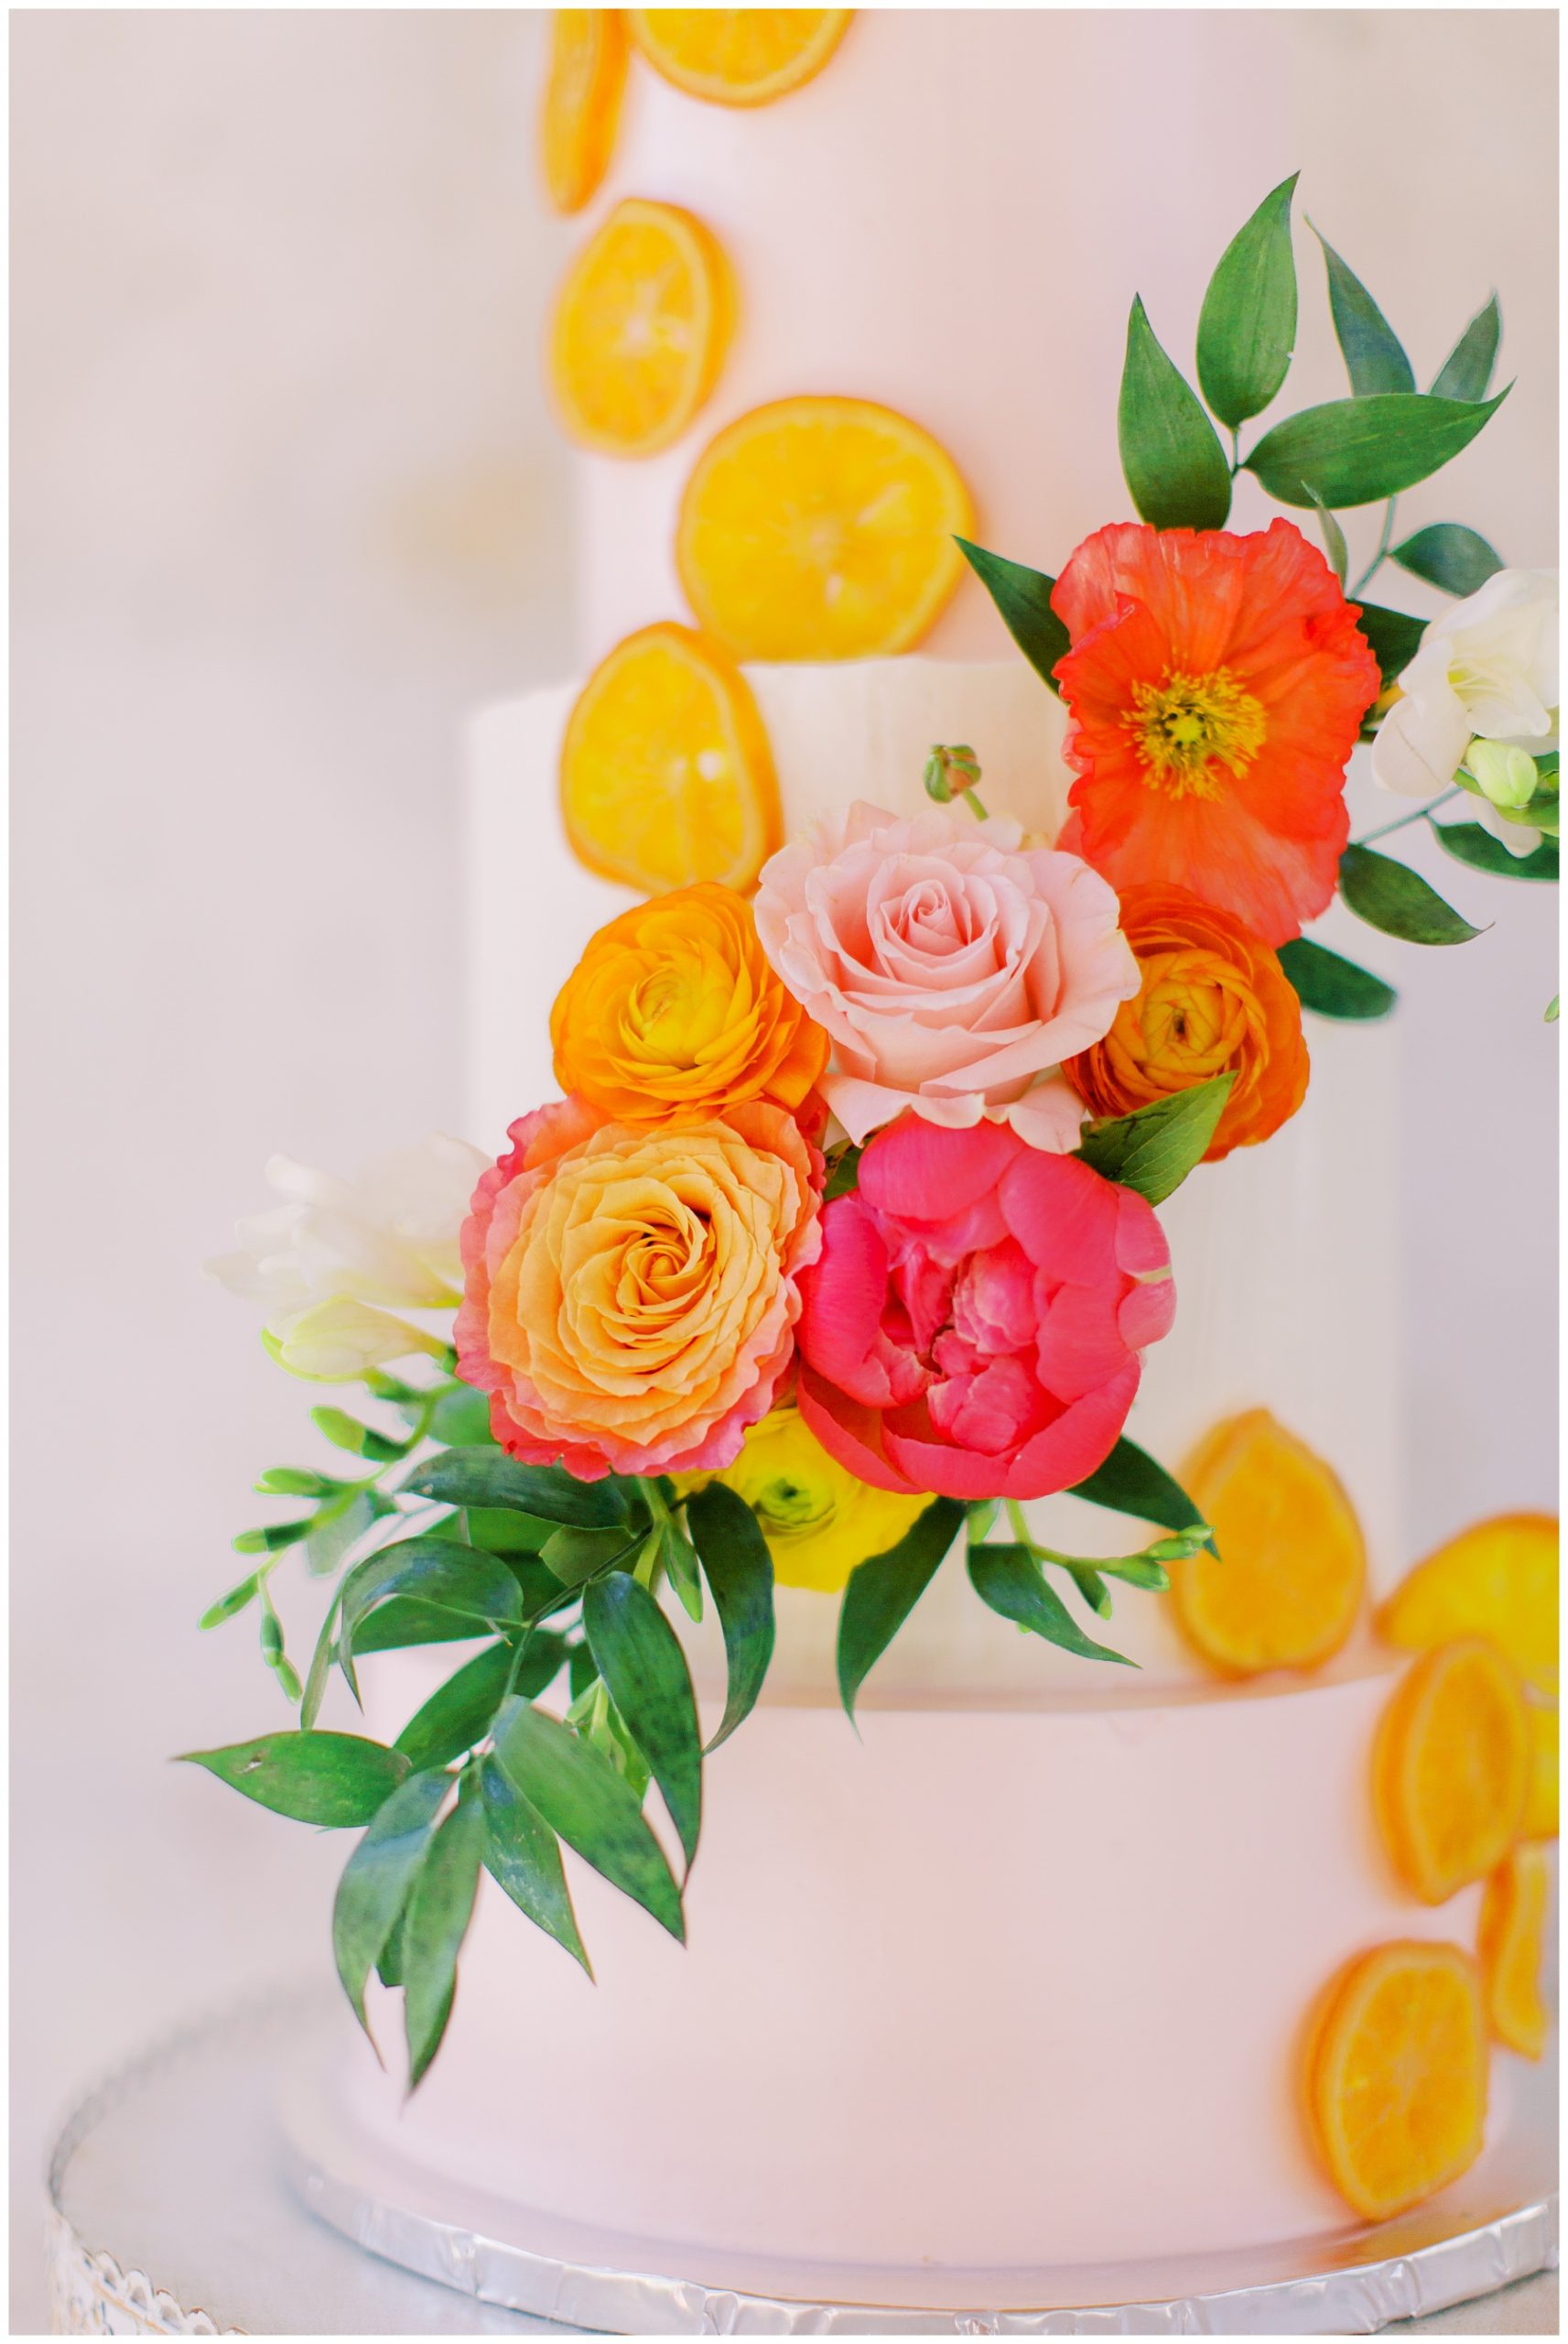 bright flowers wrapped down cake with citrus slices for citrus inspired wedding